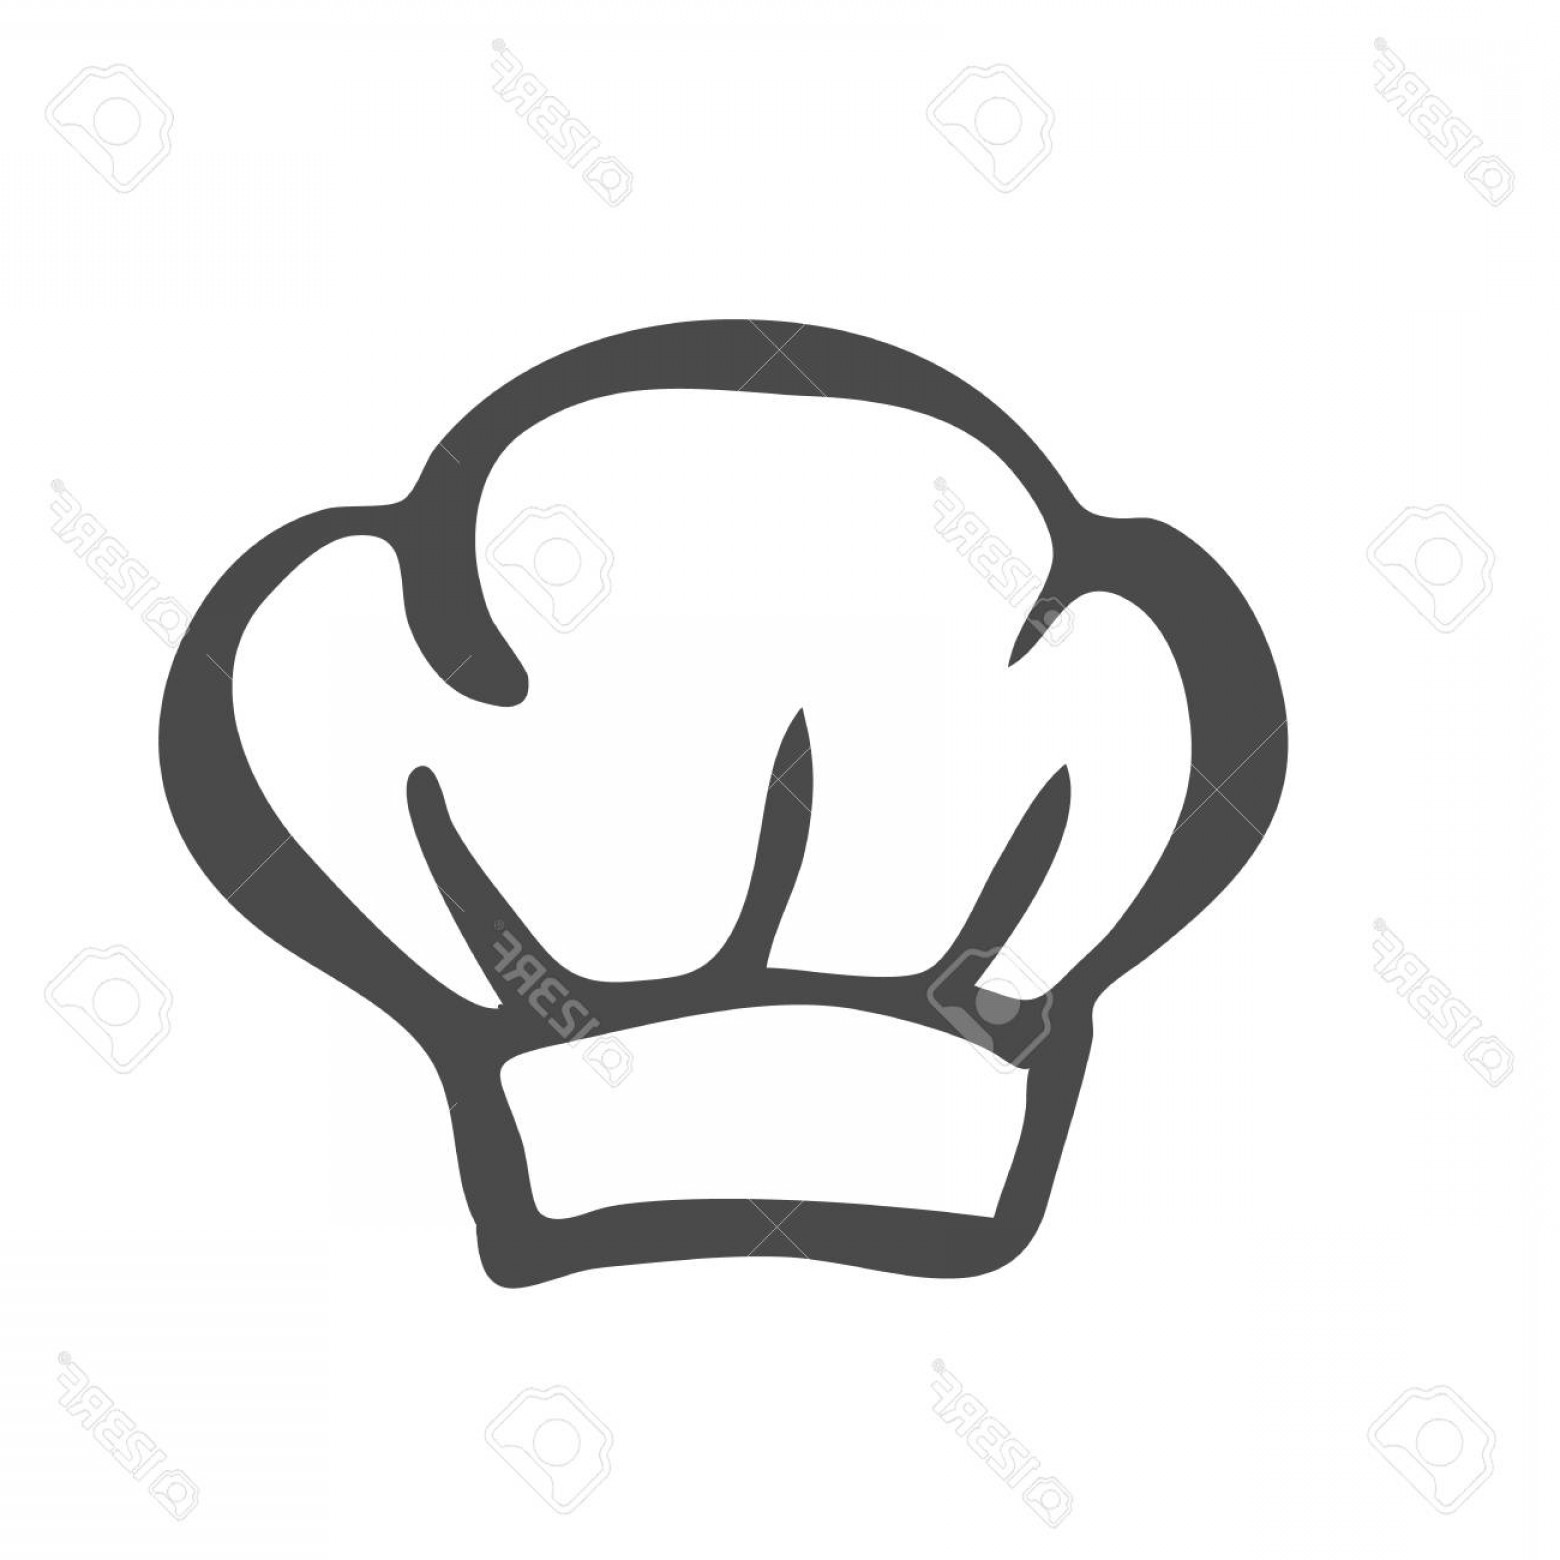 Photostock Vector Chef Hat Silhouette Isolated Black Hat.